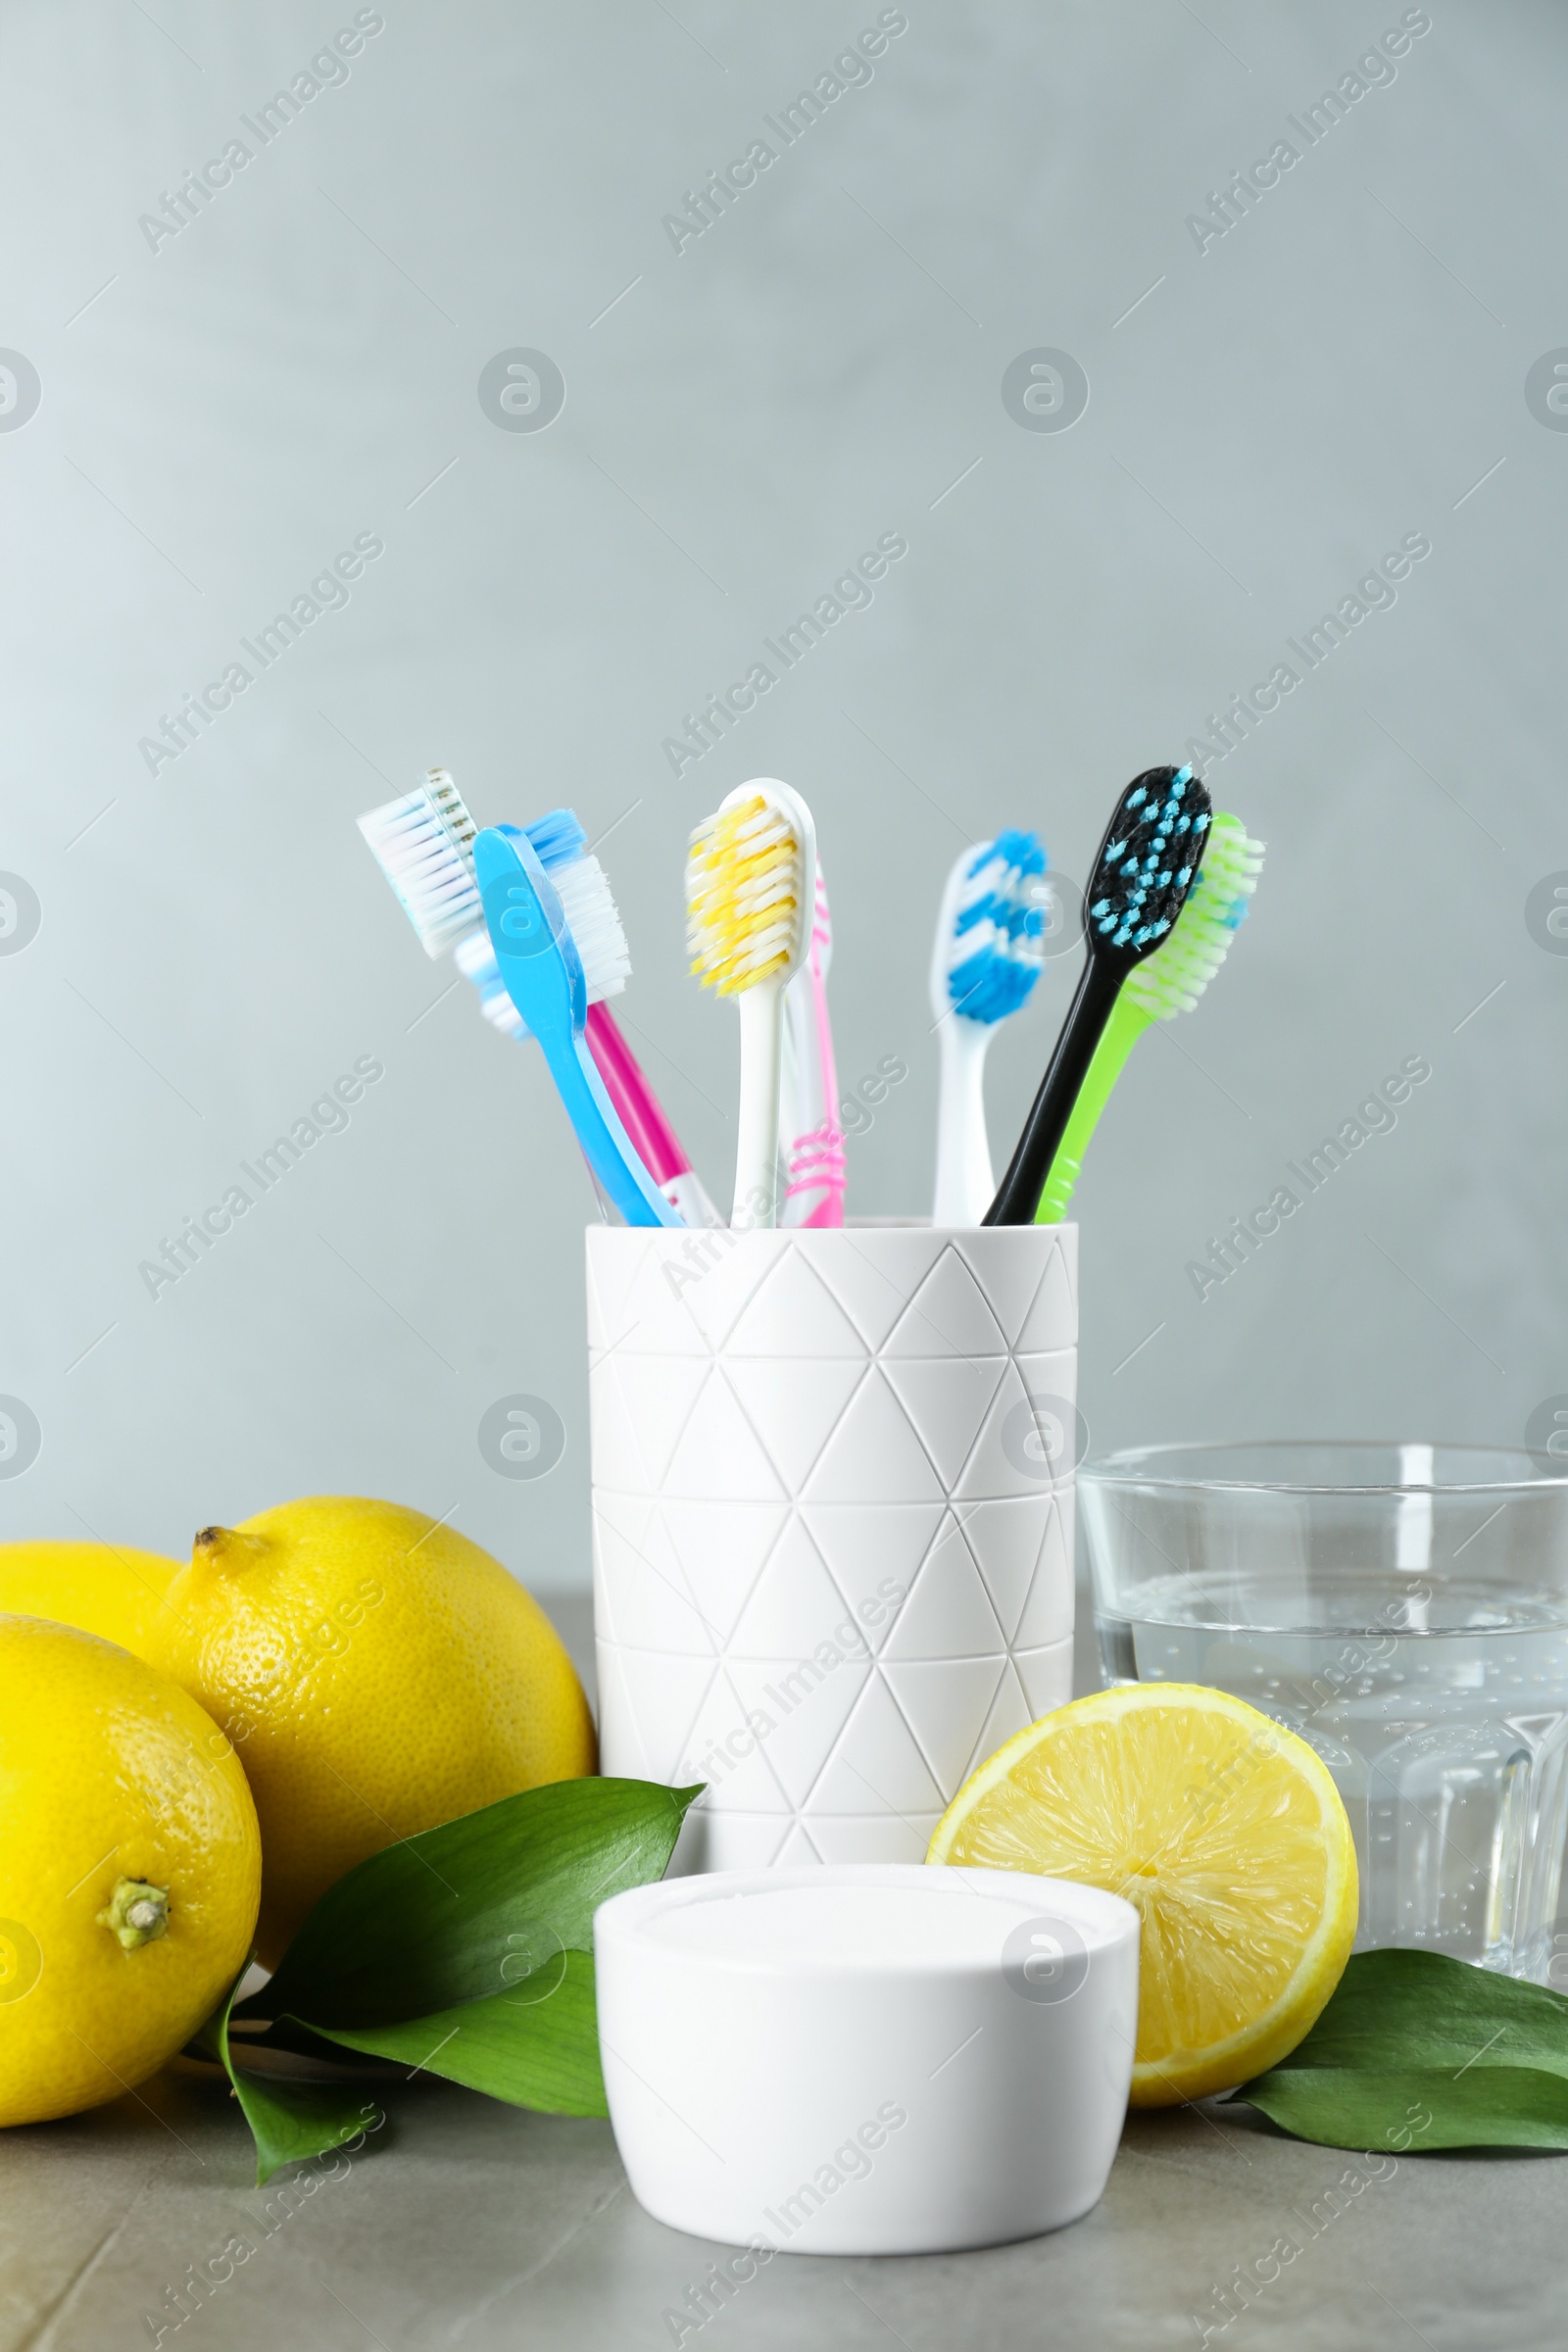 Photo of Toothbrushes, lemons and bowl of baking soda on grey table